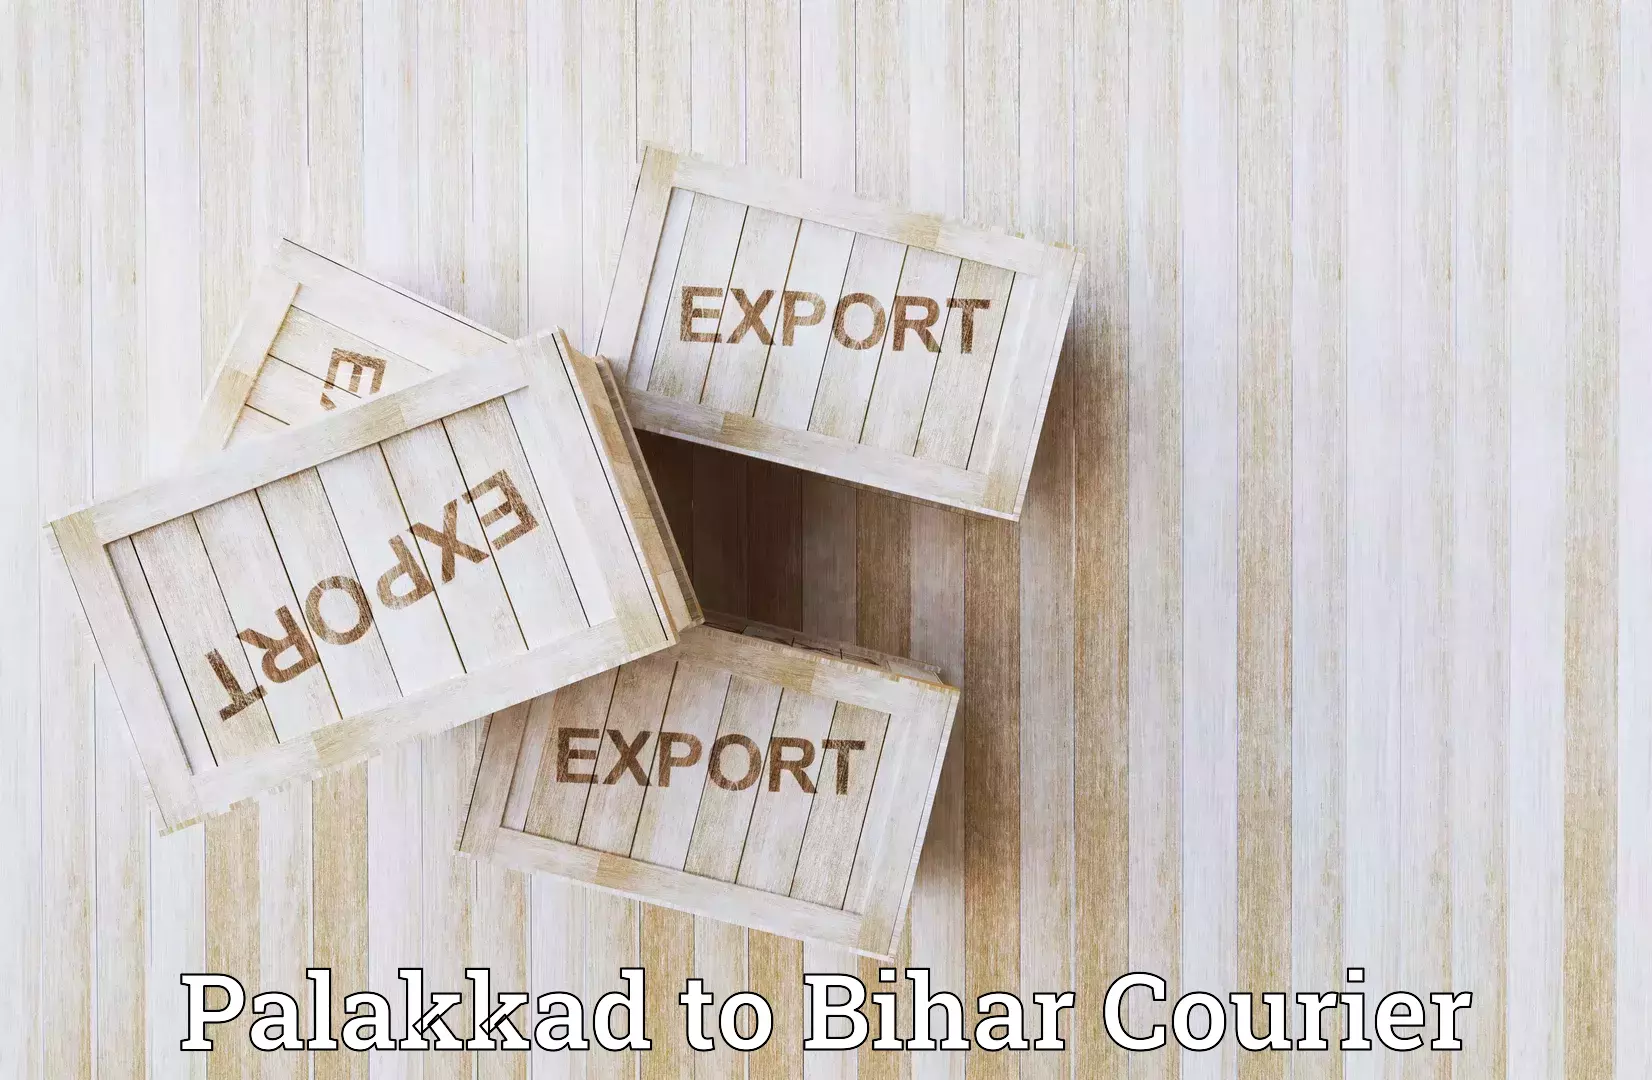 Online package tracking Palakkad to Bihar